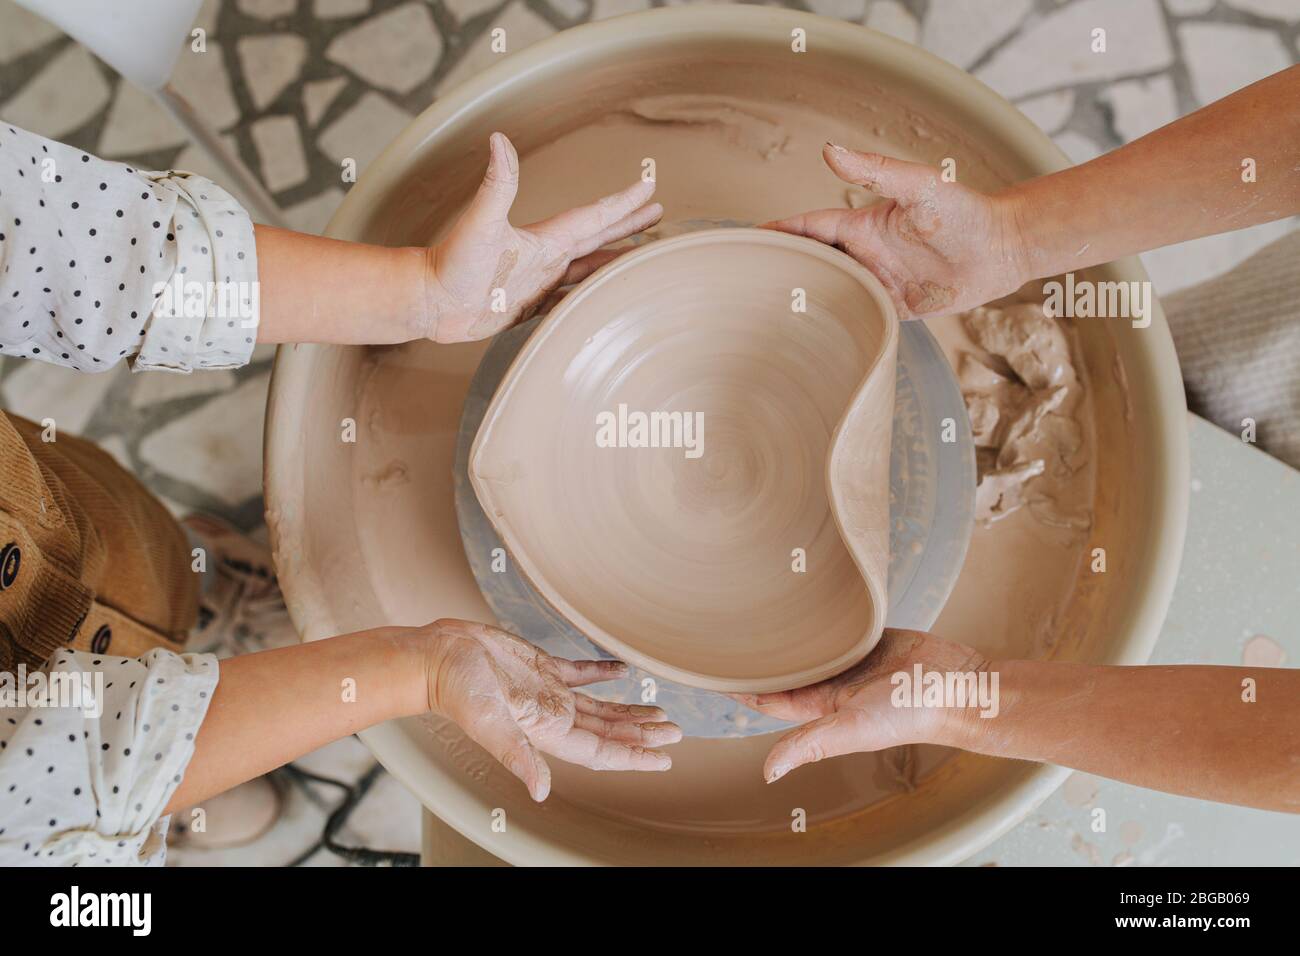 Two sets of hands giving heart shape to a clay bowl. top view Stock Photo